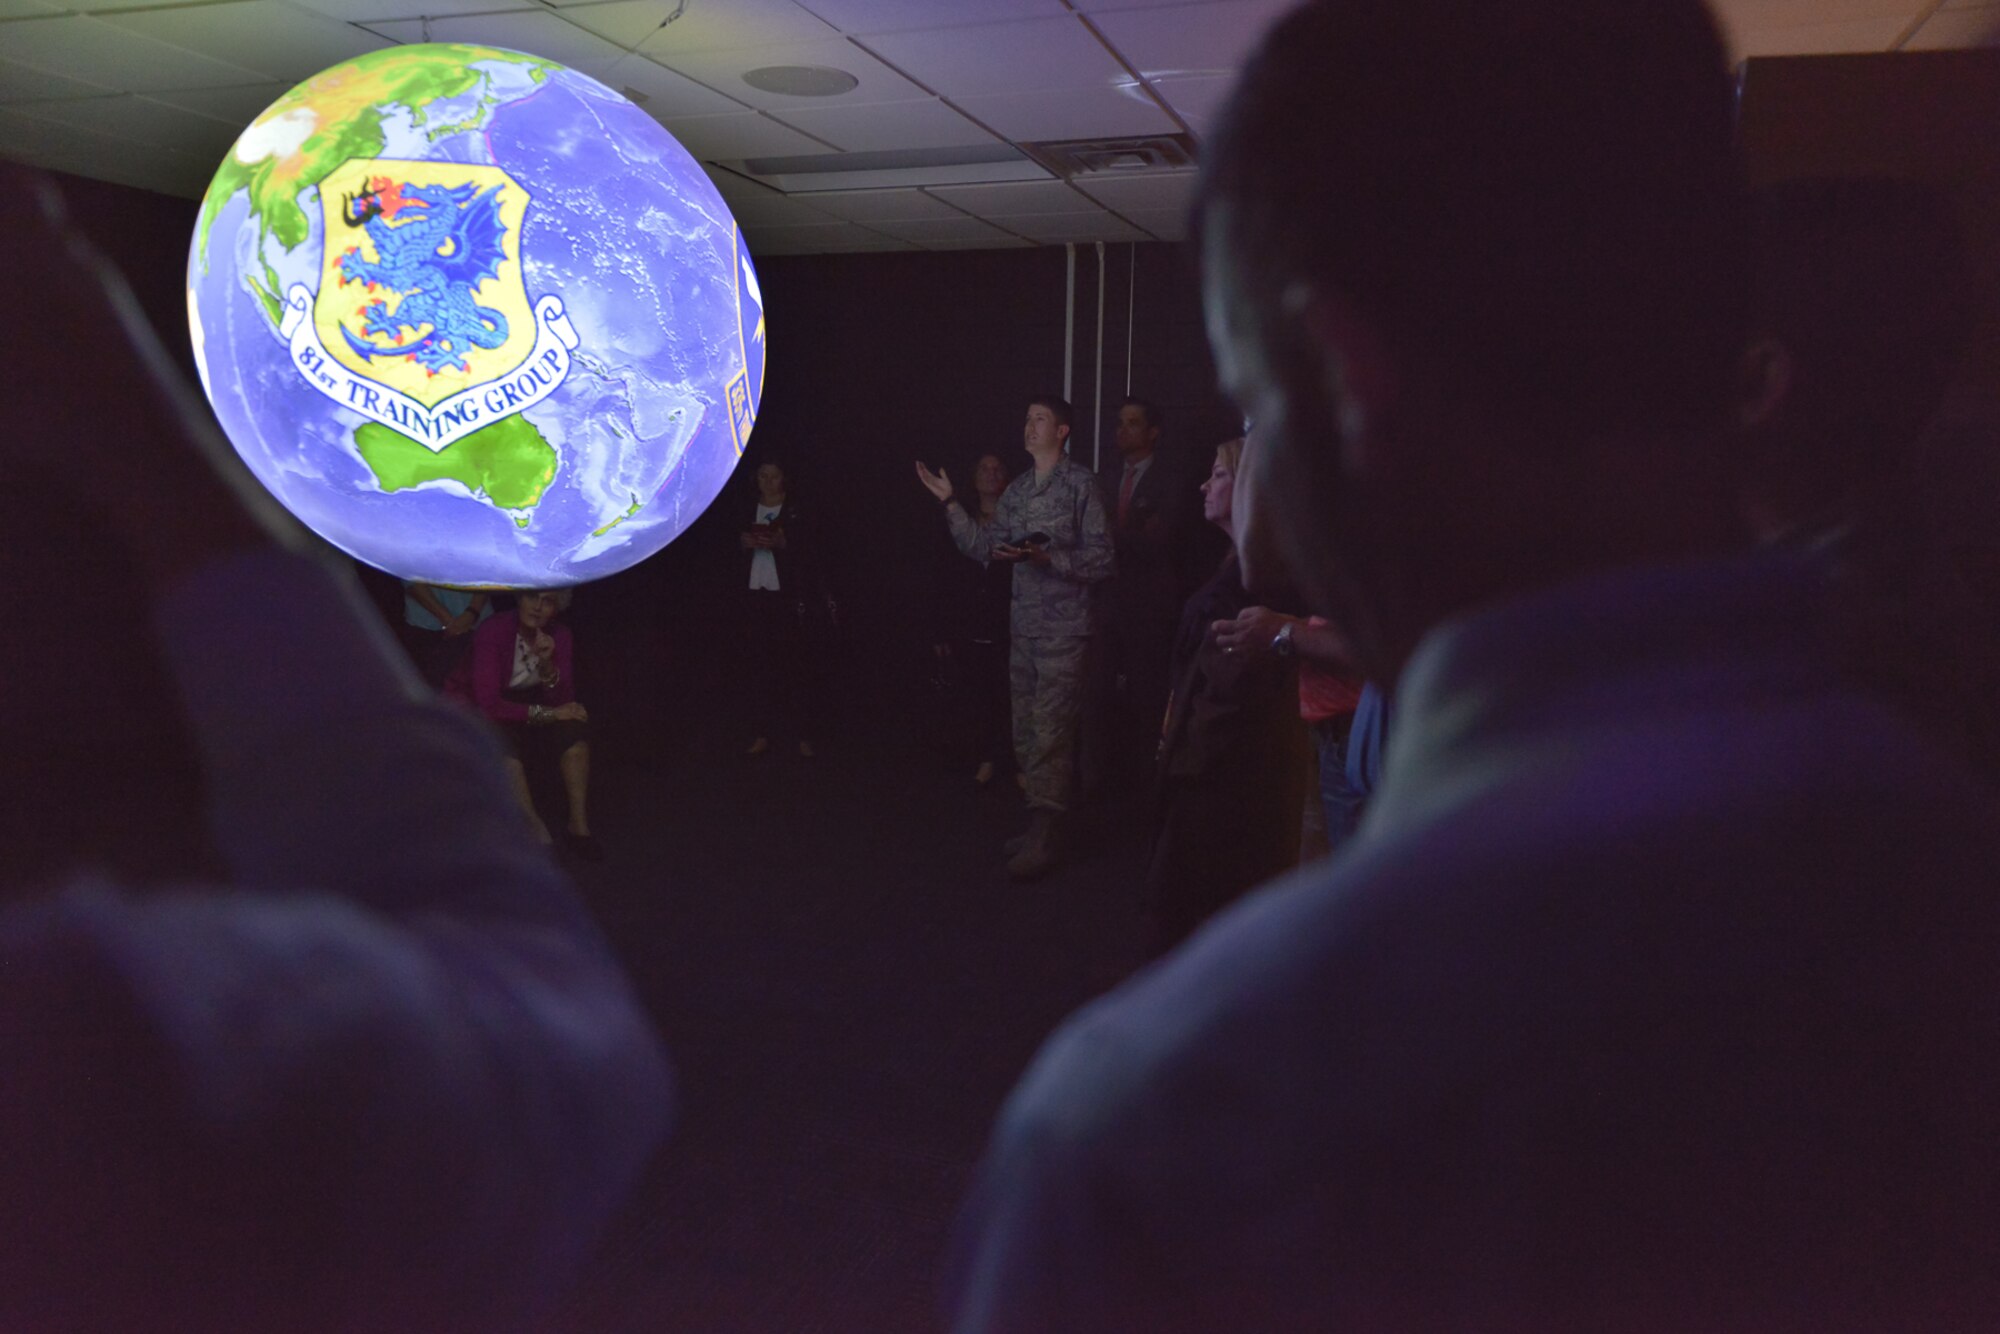 Capt. Caleb Tynes, 335th Training Squadron instructor supervisor, briefs 81st Training Wing honorary commanders on the Science on a Sphere planetary training aid at the Weather Training Complex, Mar. 30, 2017, on Keesler Air Force Base, Miss. The visit highlighted the training mission of the 81st Training Group for 81st TRW honorary commanders. (U.S. Air Force photo by Andre’ Askew)     